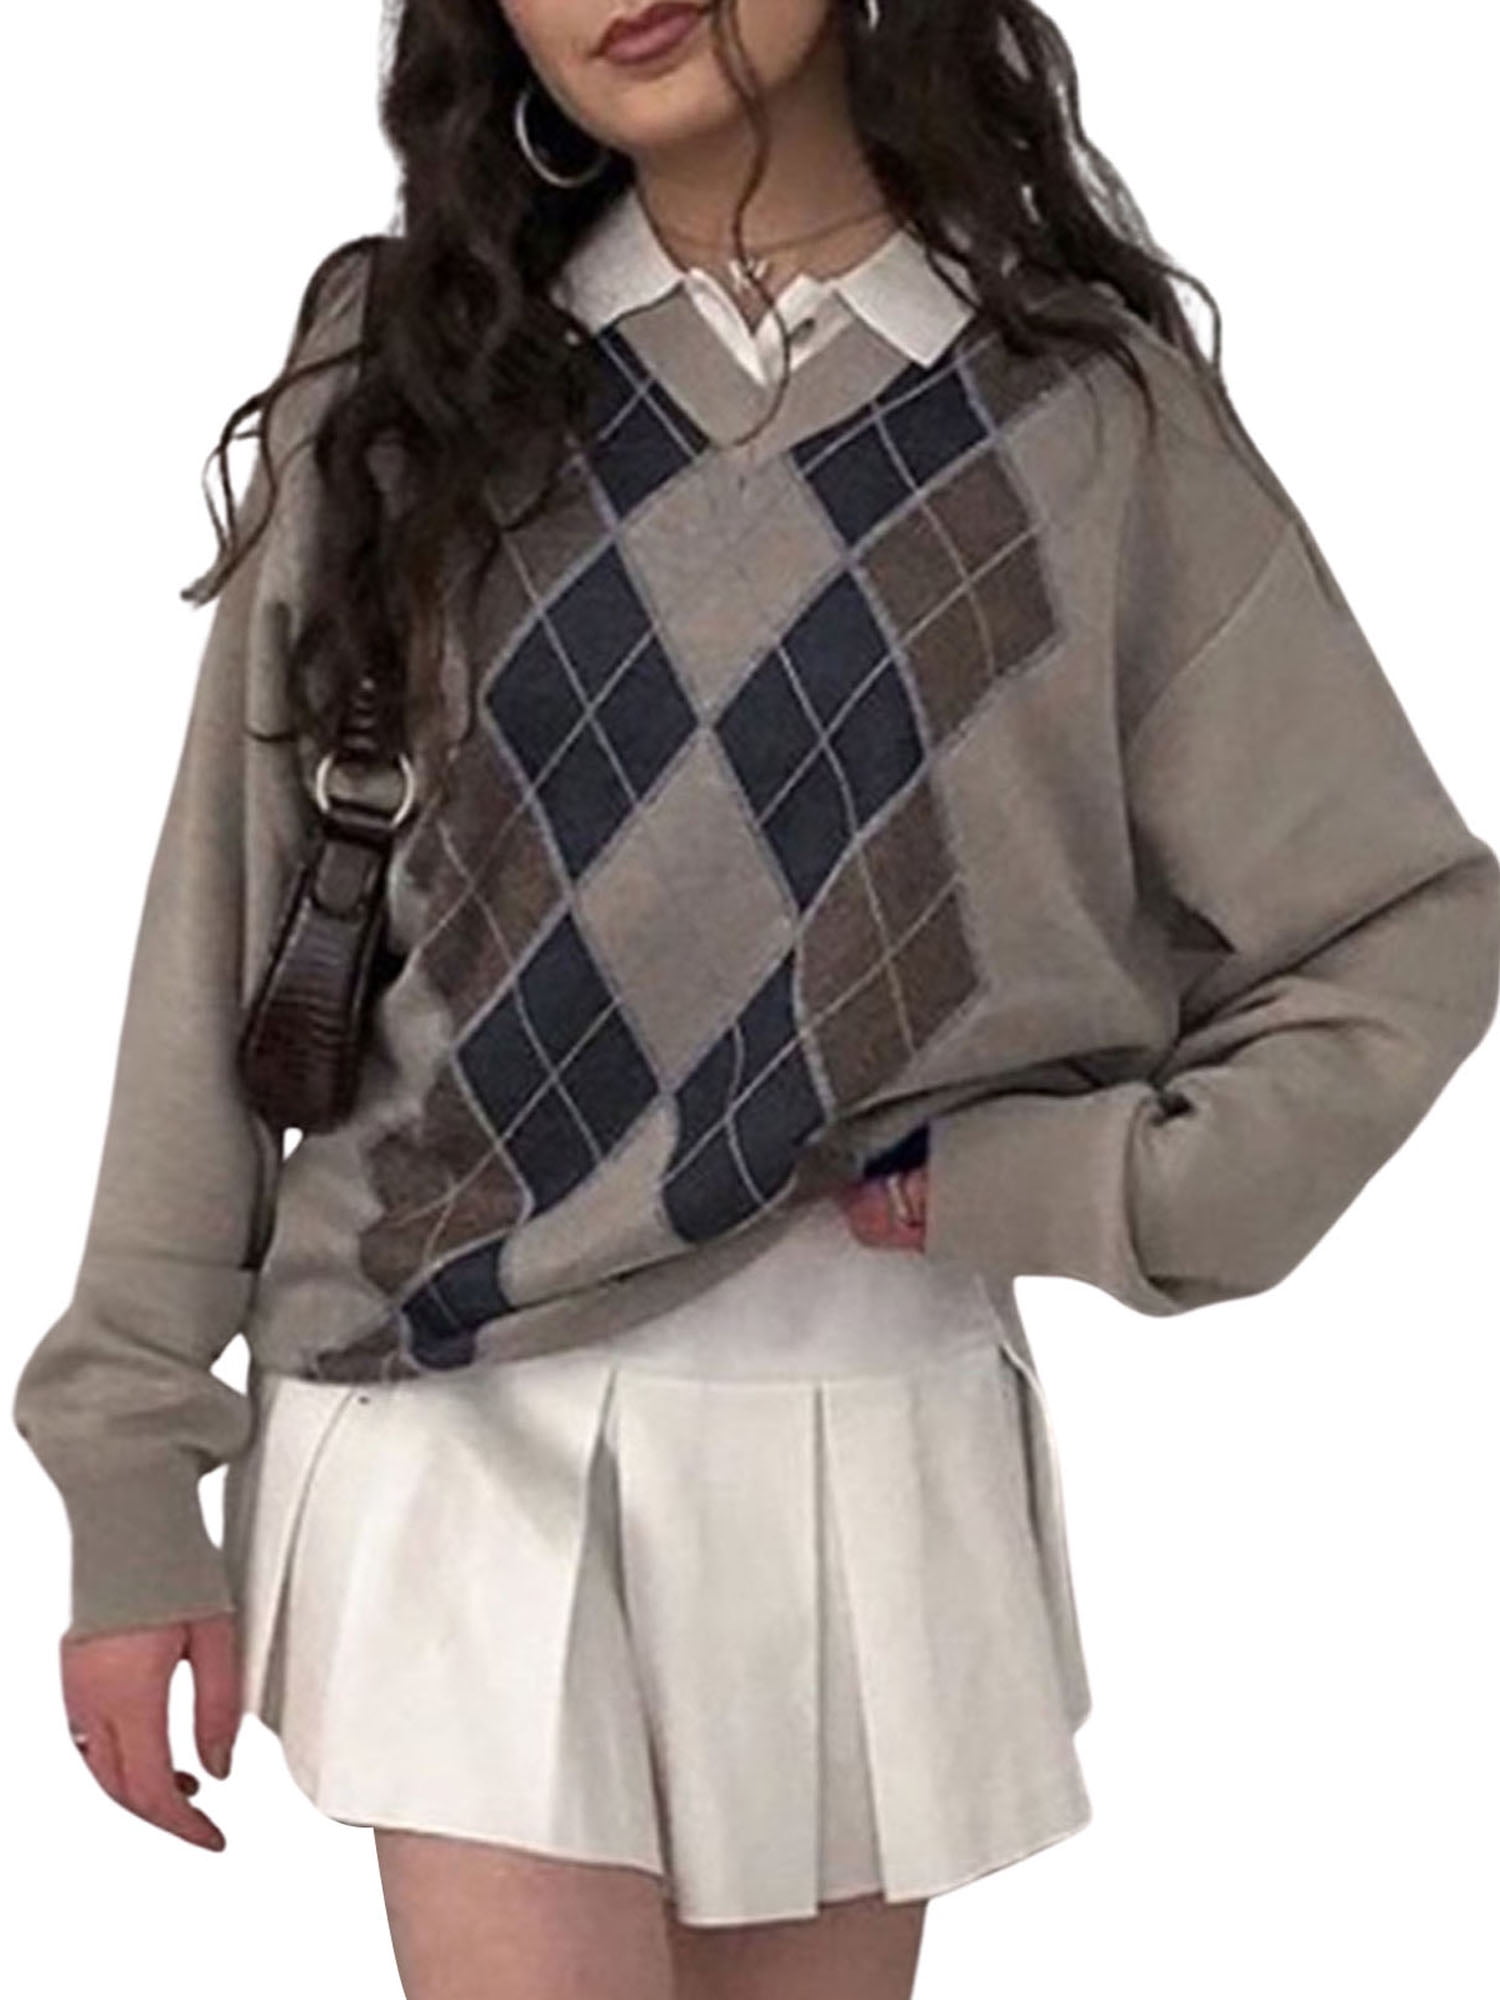 Women 's Argyle Knitted Plaid Sweater Vintage Preppy Style Long Sleeve V-Neck Button Cardigan E-Girls 90s